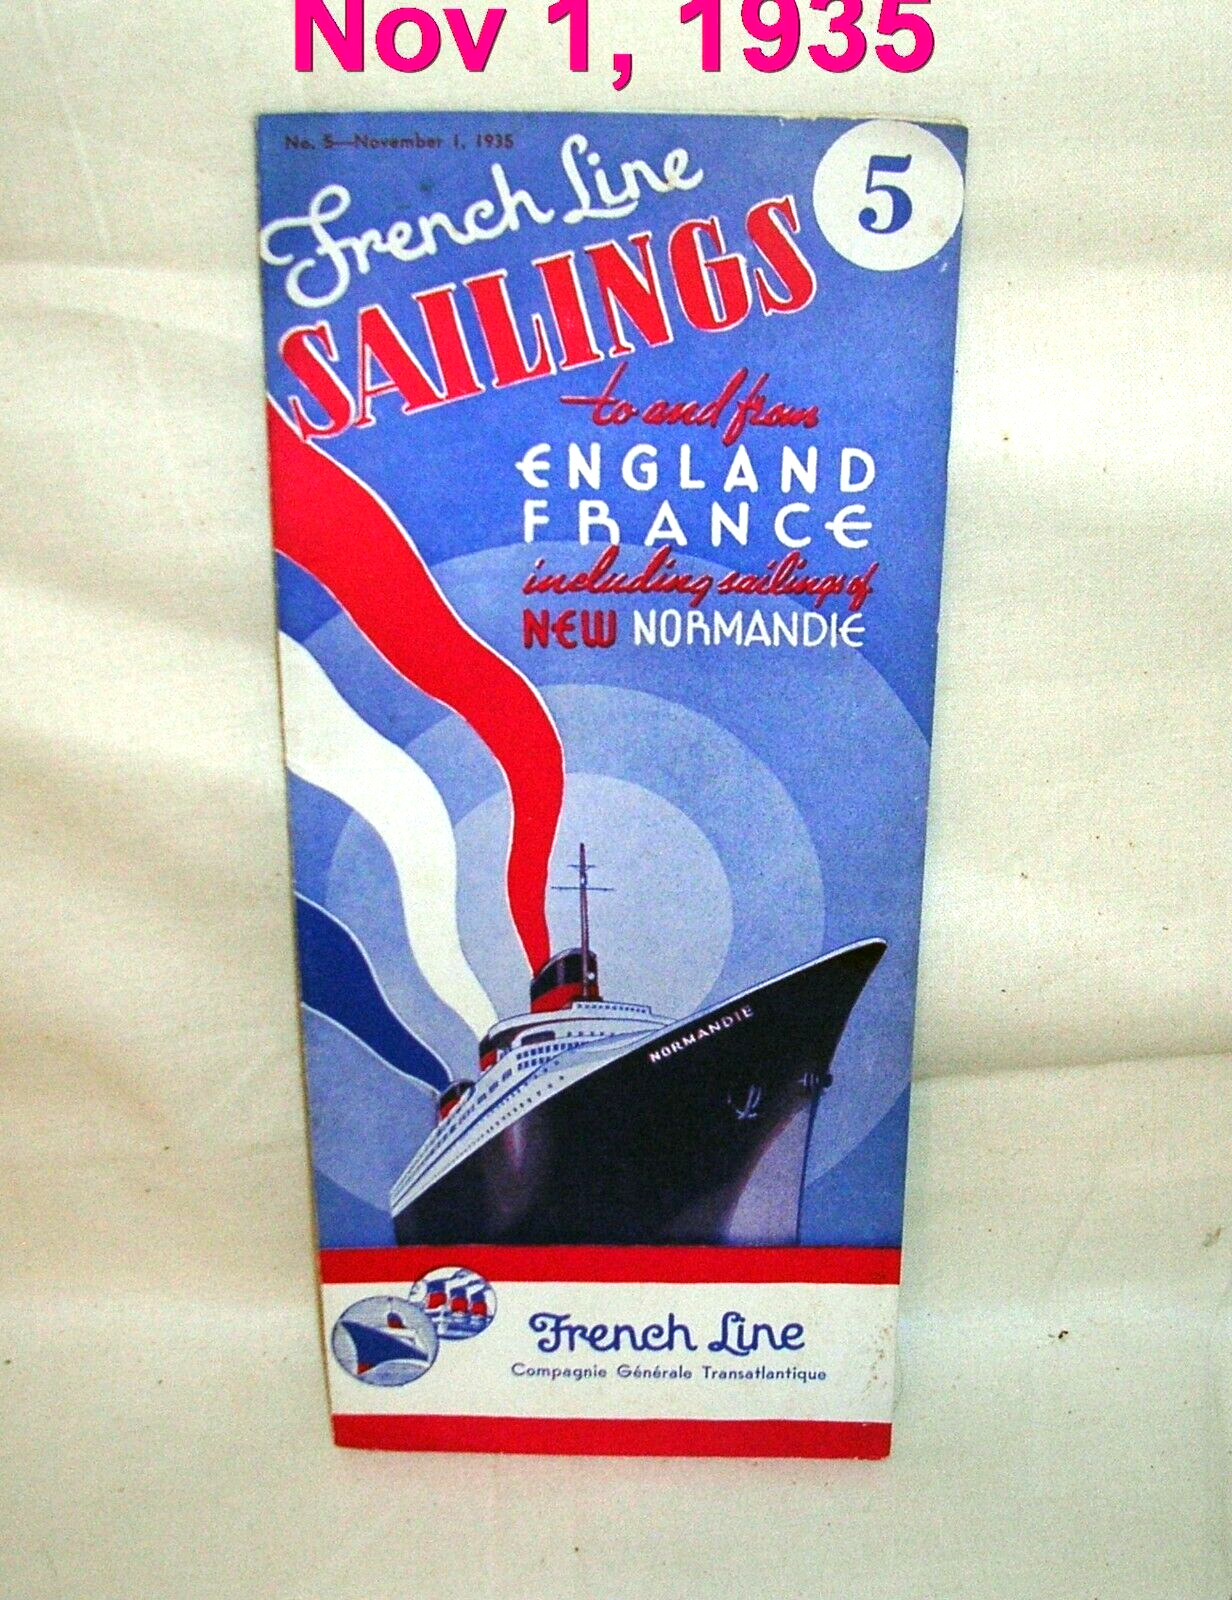 Original 1935 French Line Brochure, to England France, NEW NORMANDIE